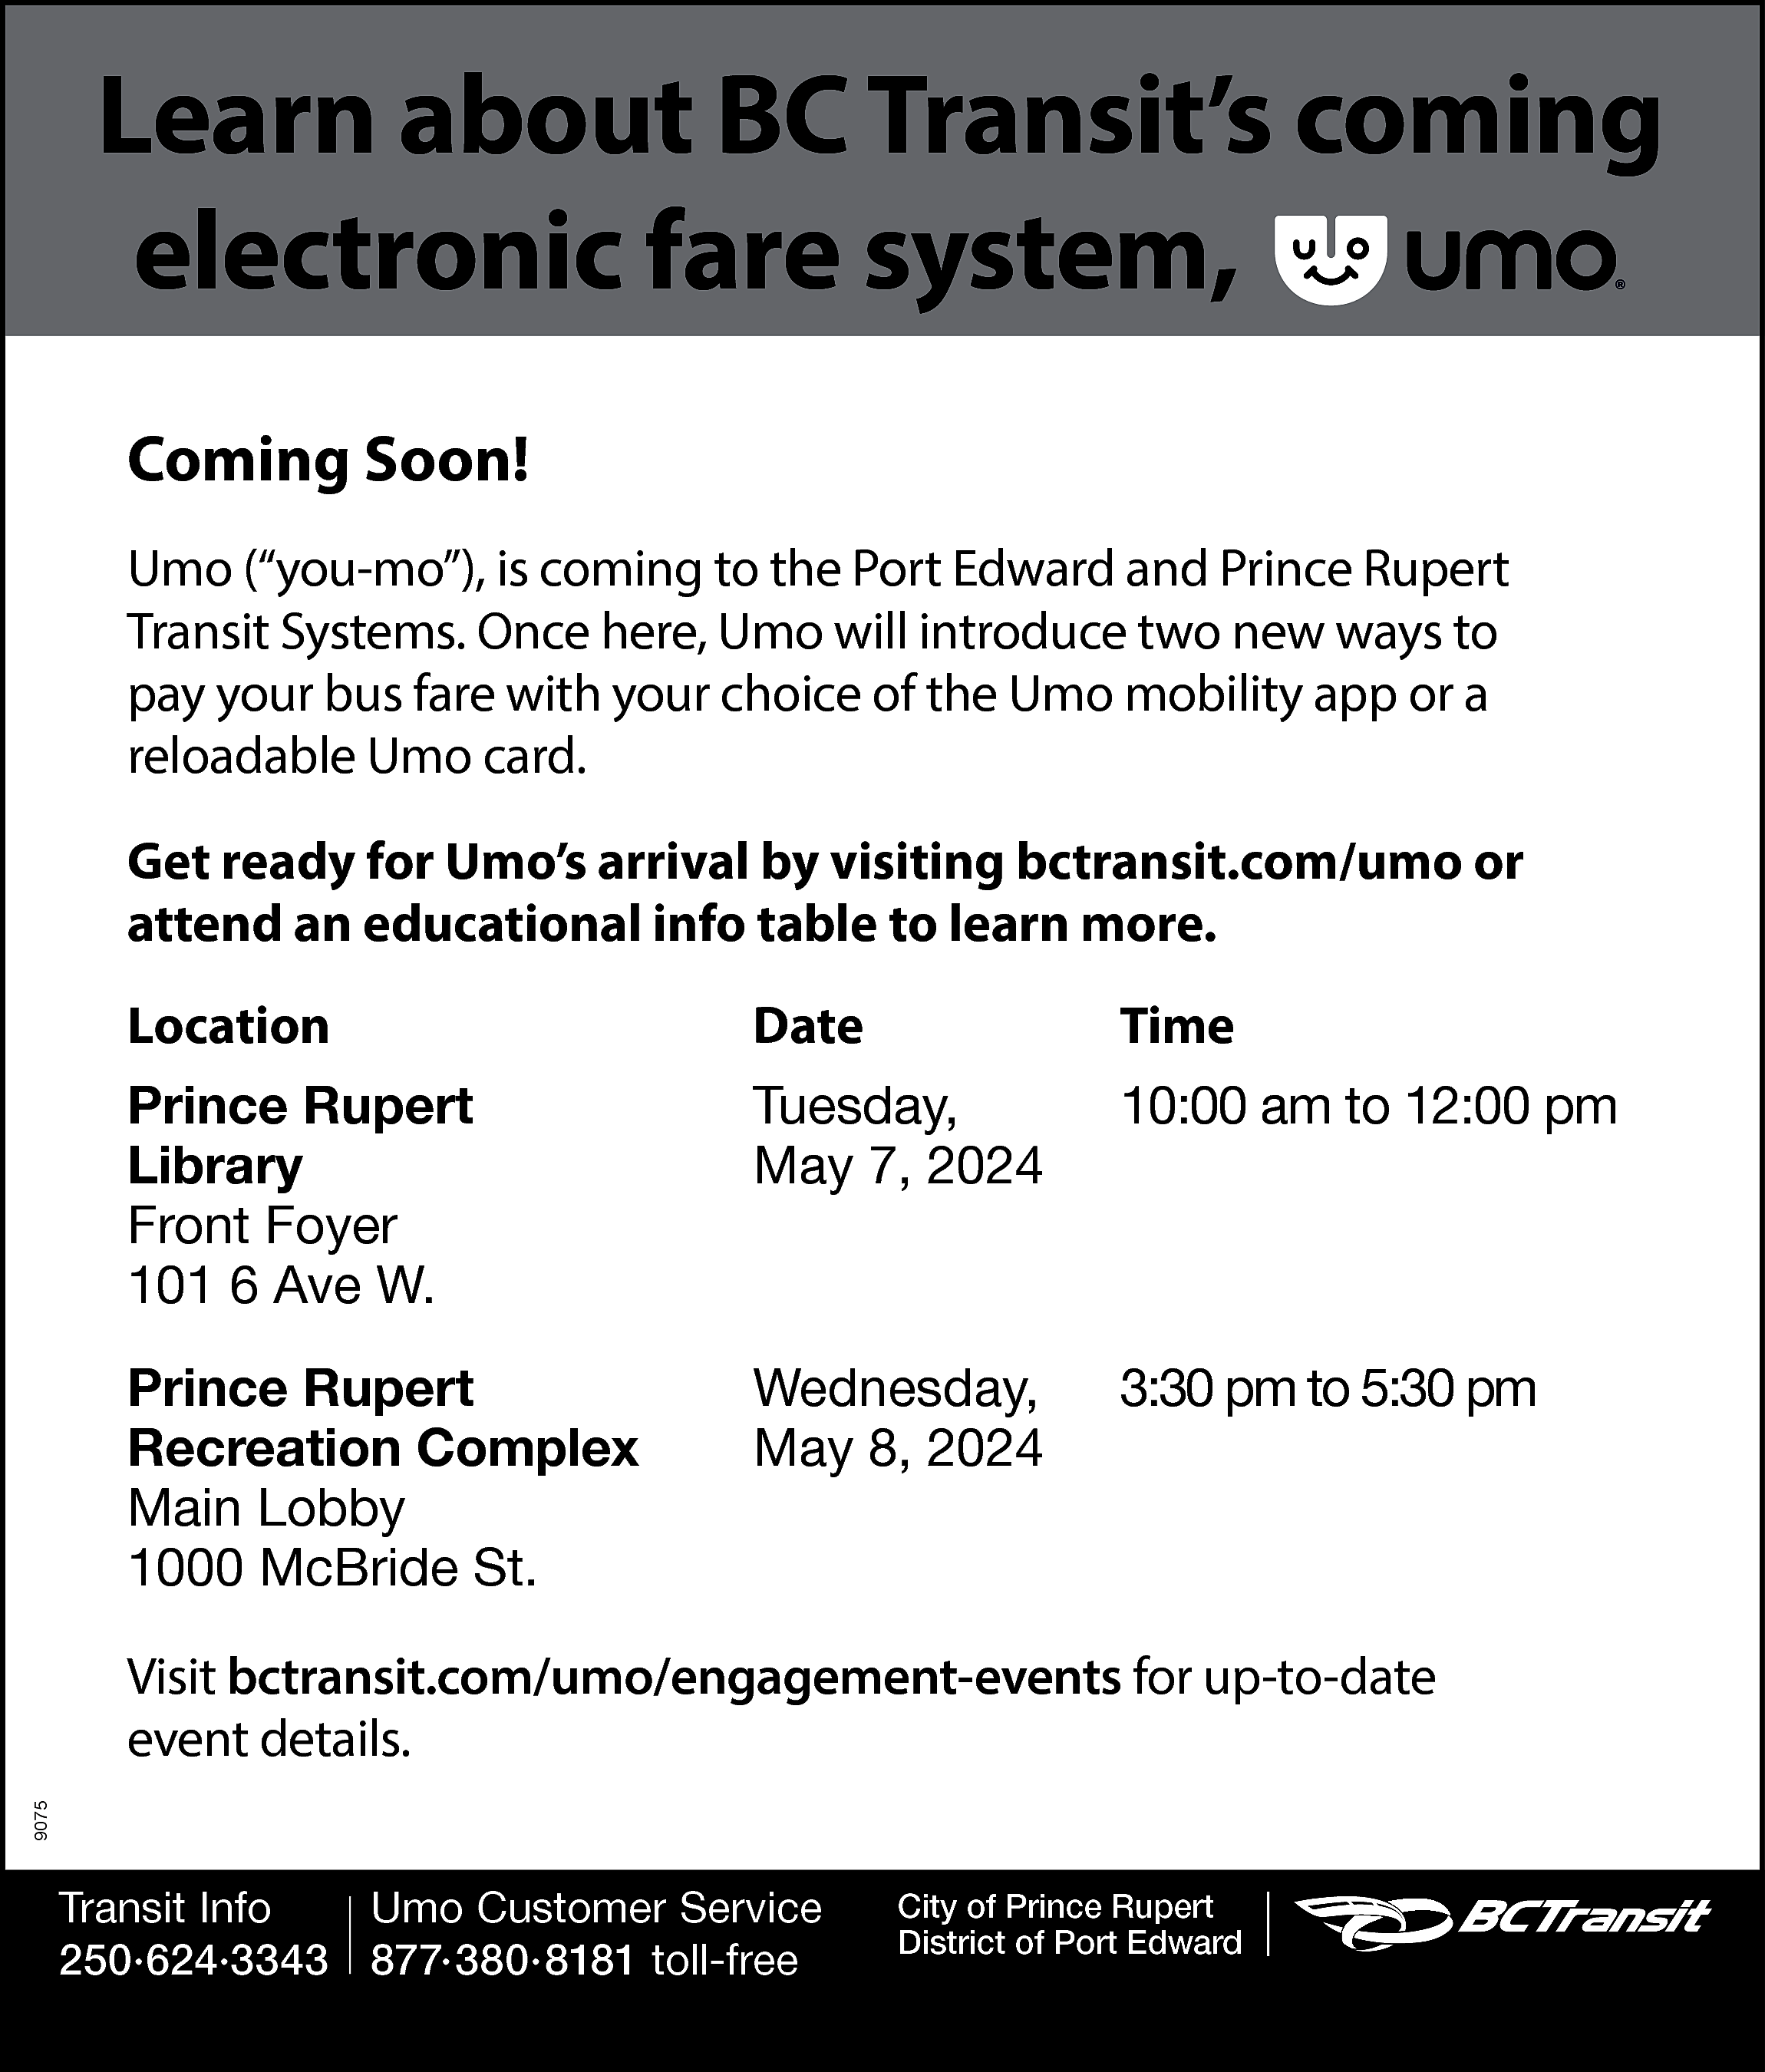 Learn about BC Transit’s coming  Learn about BC Transit’s coming  electronic fare system,  Coming Soon!  Umo (“you-mo”), is coming to the Port Edward and Prince Rupert  Transit Systems. Once here, Umo will introduce two new ways to  pay your bus fare with your choice of the Umo mobility app or a  reloadable Umo card.  Get ready for Umo’s arrival by visiting bctransit.com/umo or  attend an educational info table to learn more.  Location    Date    Time    Prince Rupert  Library  Front Foyer  101 6 Ave W.    Tuesday,  May 7, 2024    10:00 am to 12:00 pm    Prince Rupert  Recreation Complex  Main Lobby  1000 McBride St.    Wednesday,  May 8, 2024    3:30 pm to 5:30 pm    9075    Visit bctransit.com/umo/engagement-events for up-to-date  event details.  Transit Info  Umo Customer Service  250·624·3343 877·380·8181 toll-free    City of Prince Rupert  District of Port Edward    